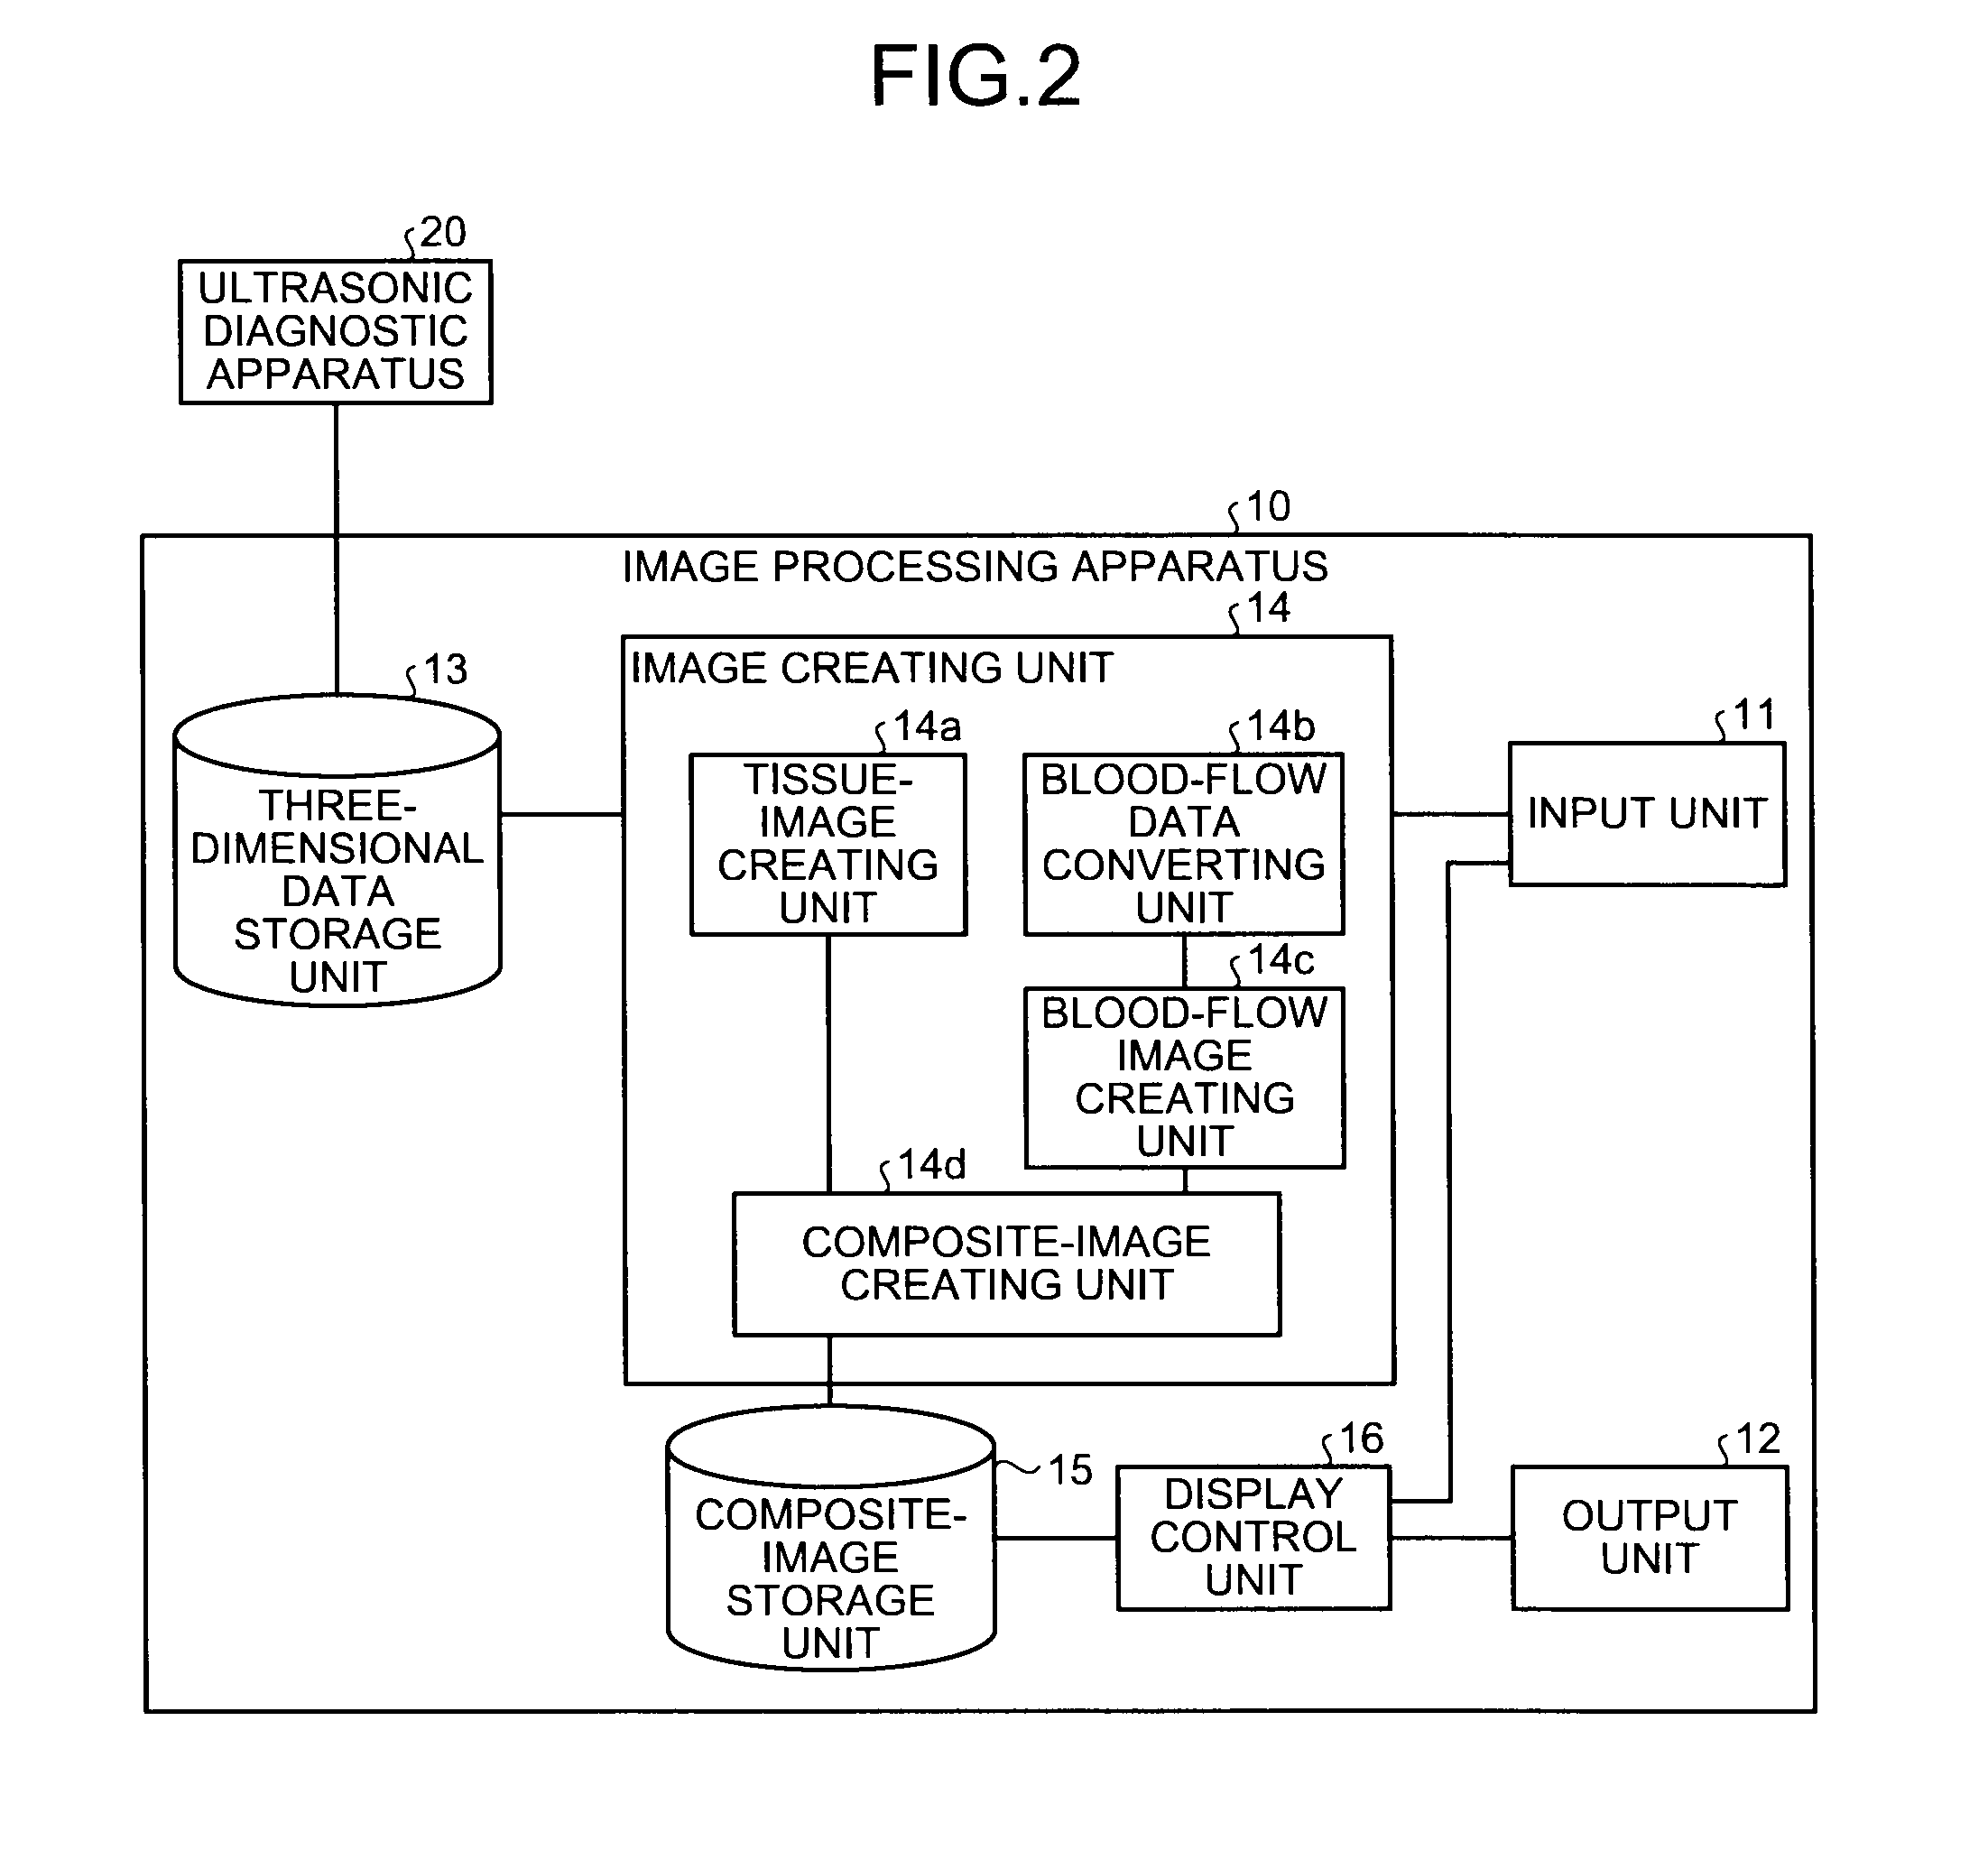 Image processing apparatus and computer program product